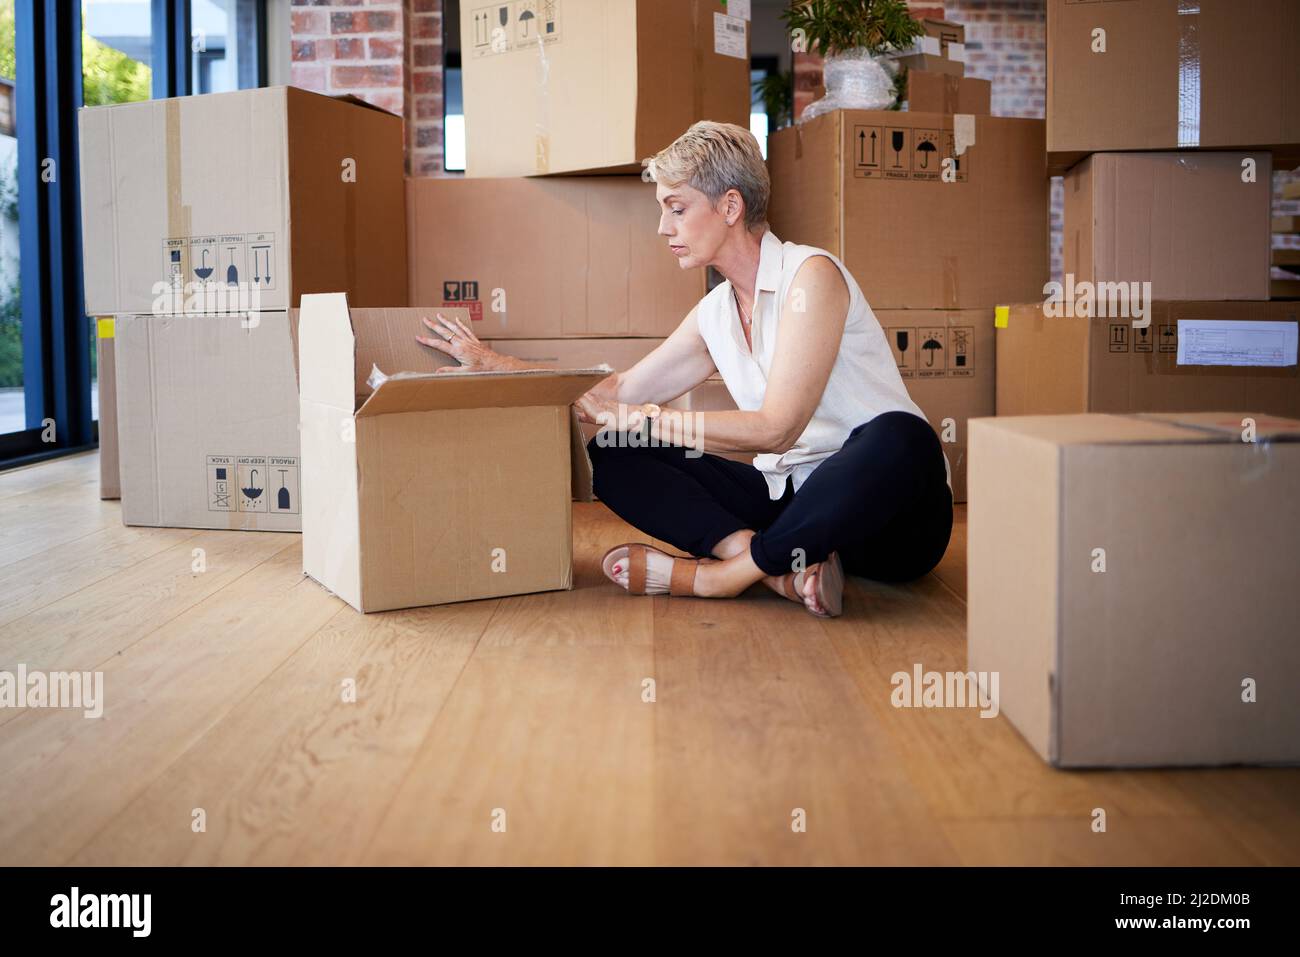 My home, my heart. Shot of a mature woman unpacking boxes on moving day. Stock Photo